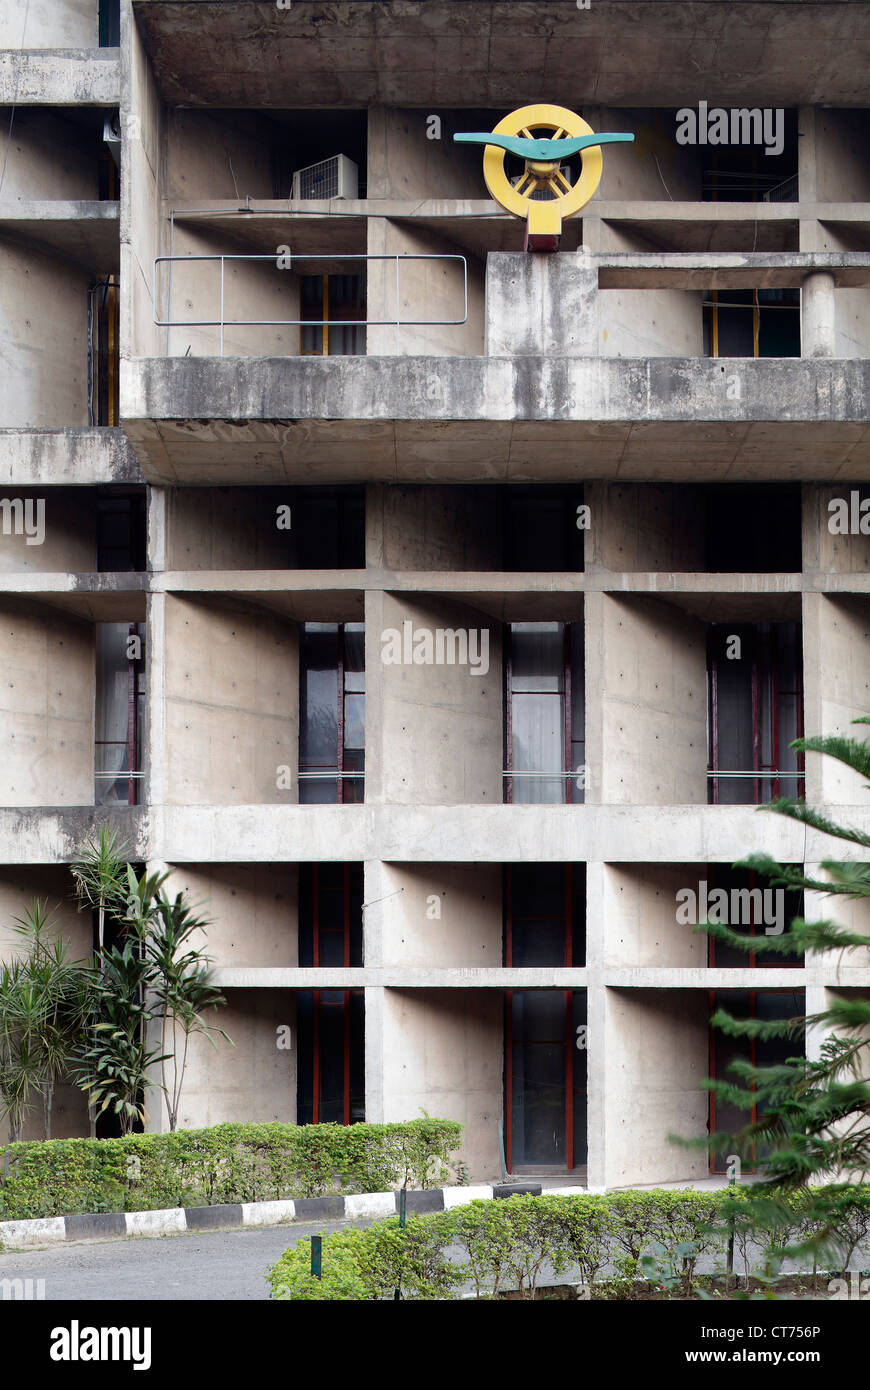 Capitol Complex, Chandigarh, India. Architect: Le Corbusier, 1957. Main entrance to the Assembly building with Briese Soleil and Stock Photo